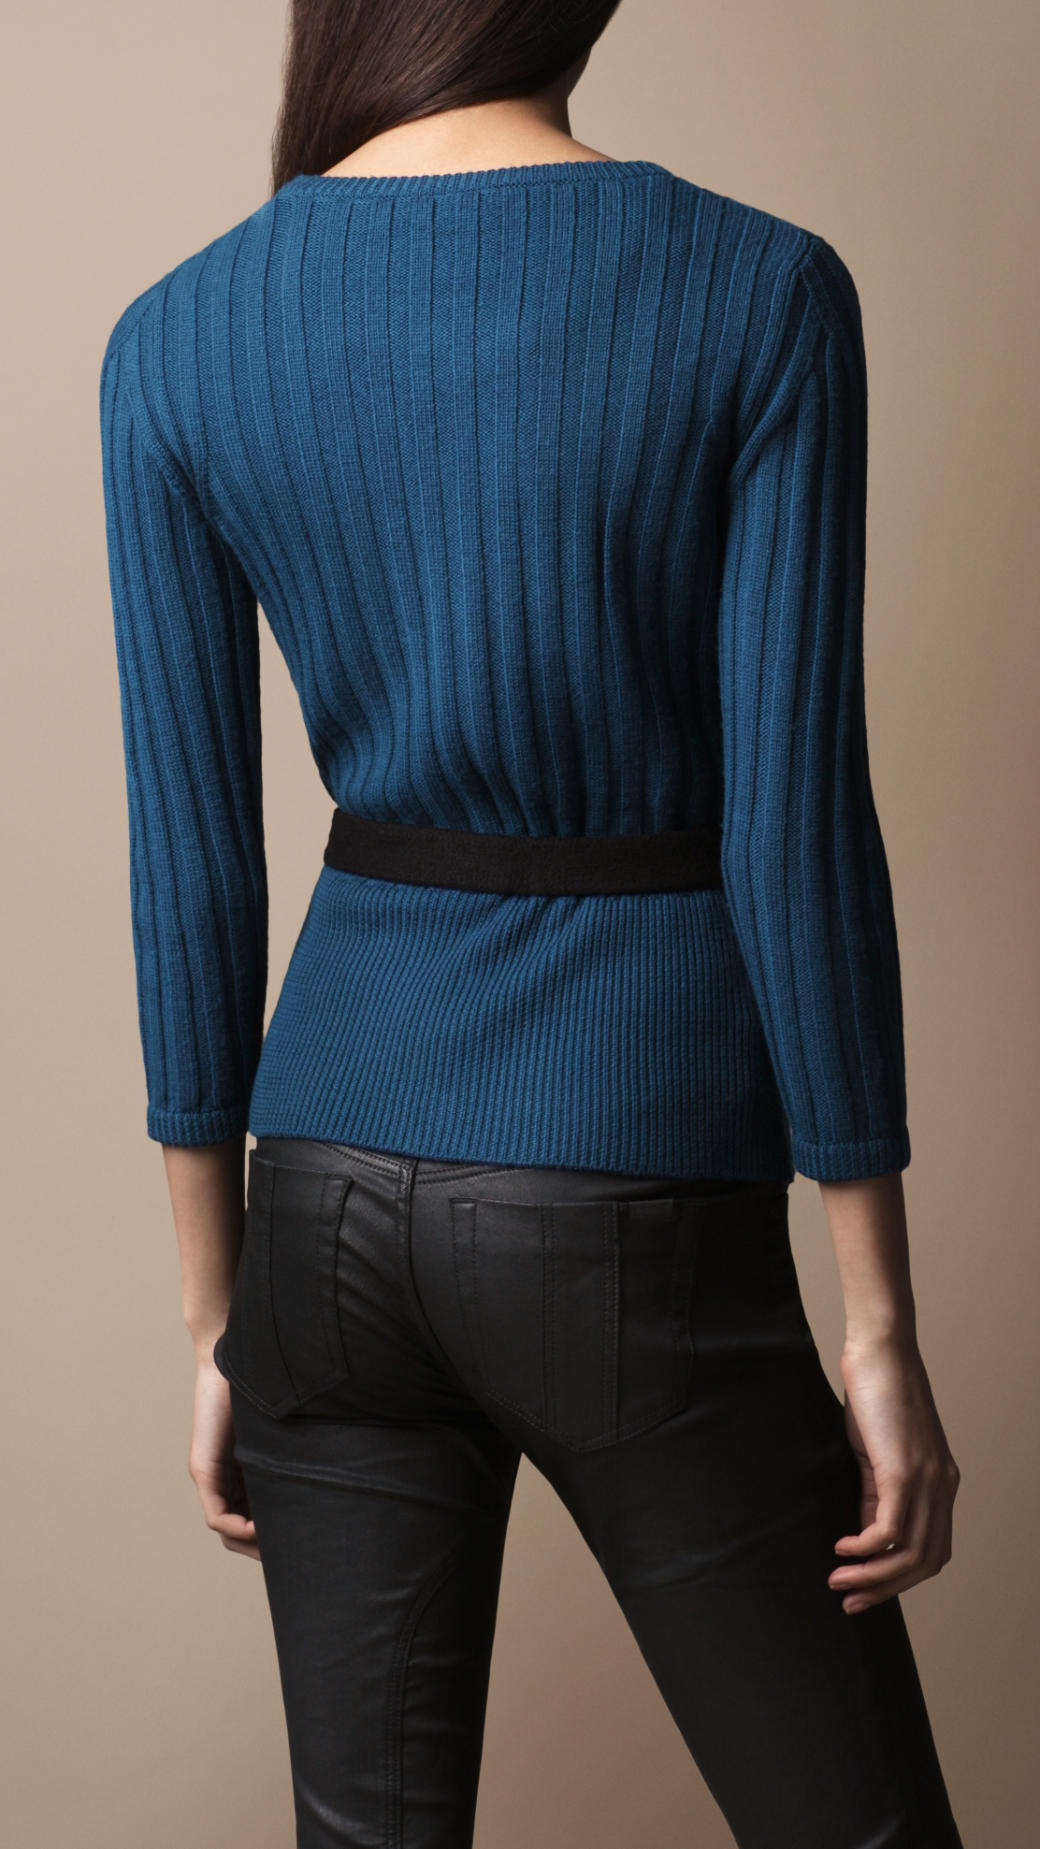 Burberry Brit Ribbed Knit Belted Cardigan in Blue - Lyst